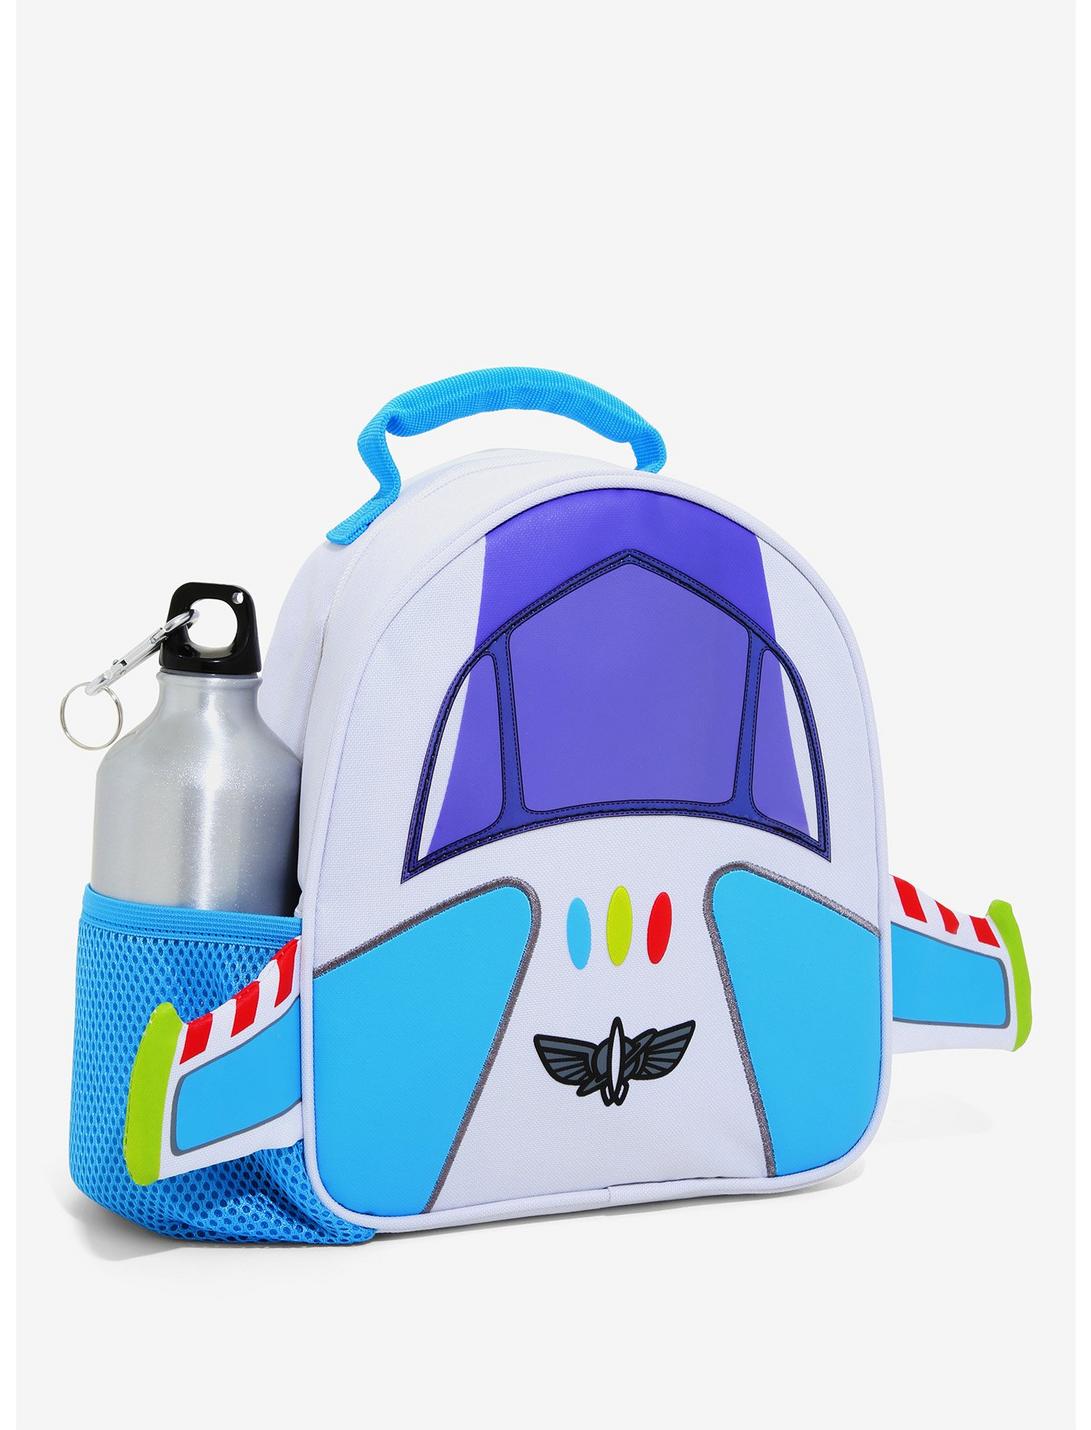 Disney Pixar Toy Story Buzz Lightyear Jet Pack Insulated Lunch Box -  BoxLunch Exclusive